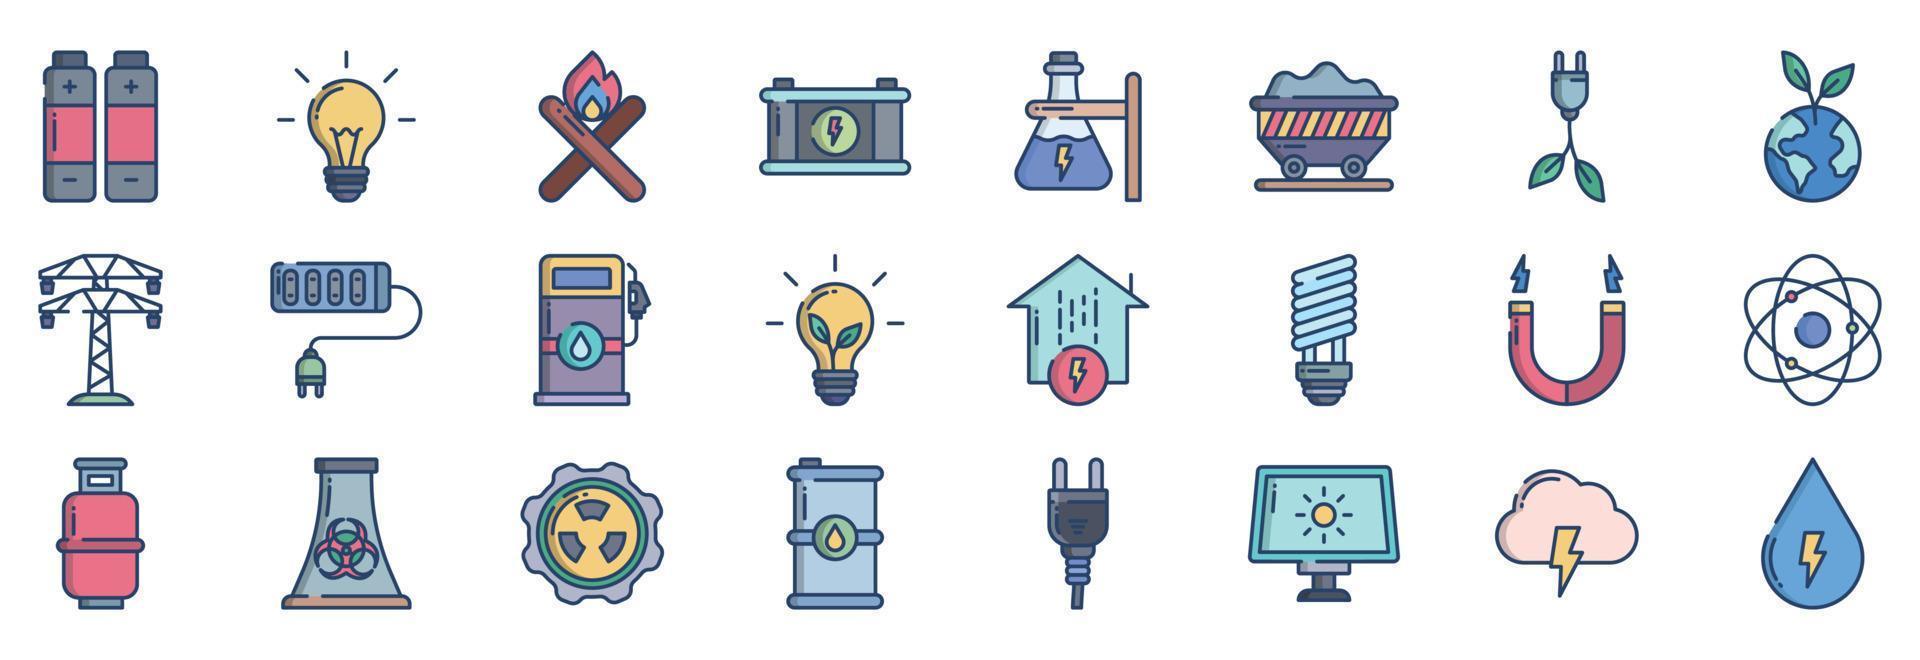 Collection of icons related to Power and Energy, including icons like Battery, Bulb, electric power, Ecology and more. vector illustrations, Pixel Perfect set